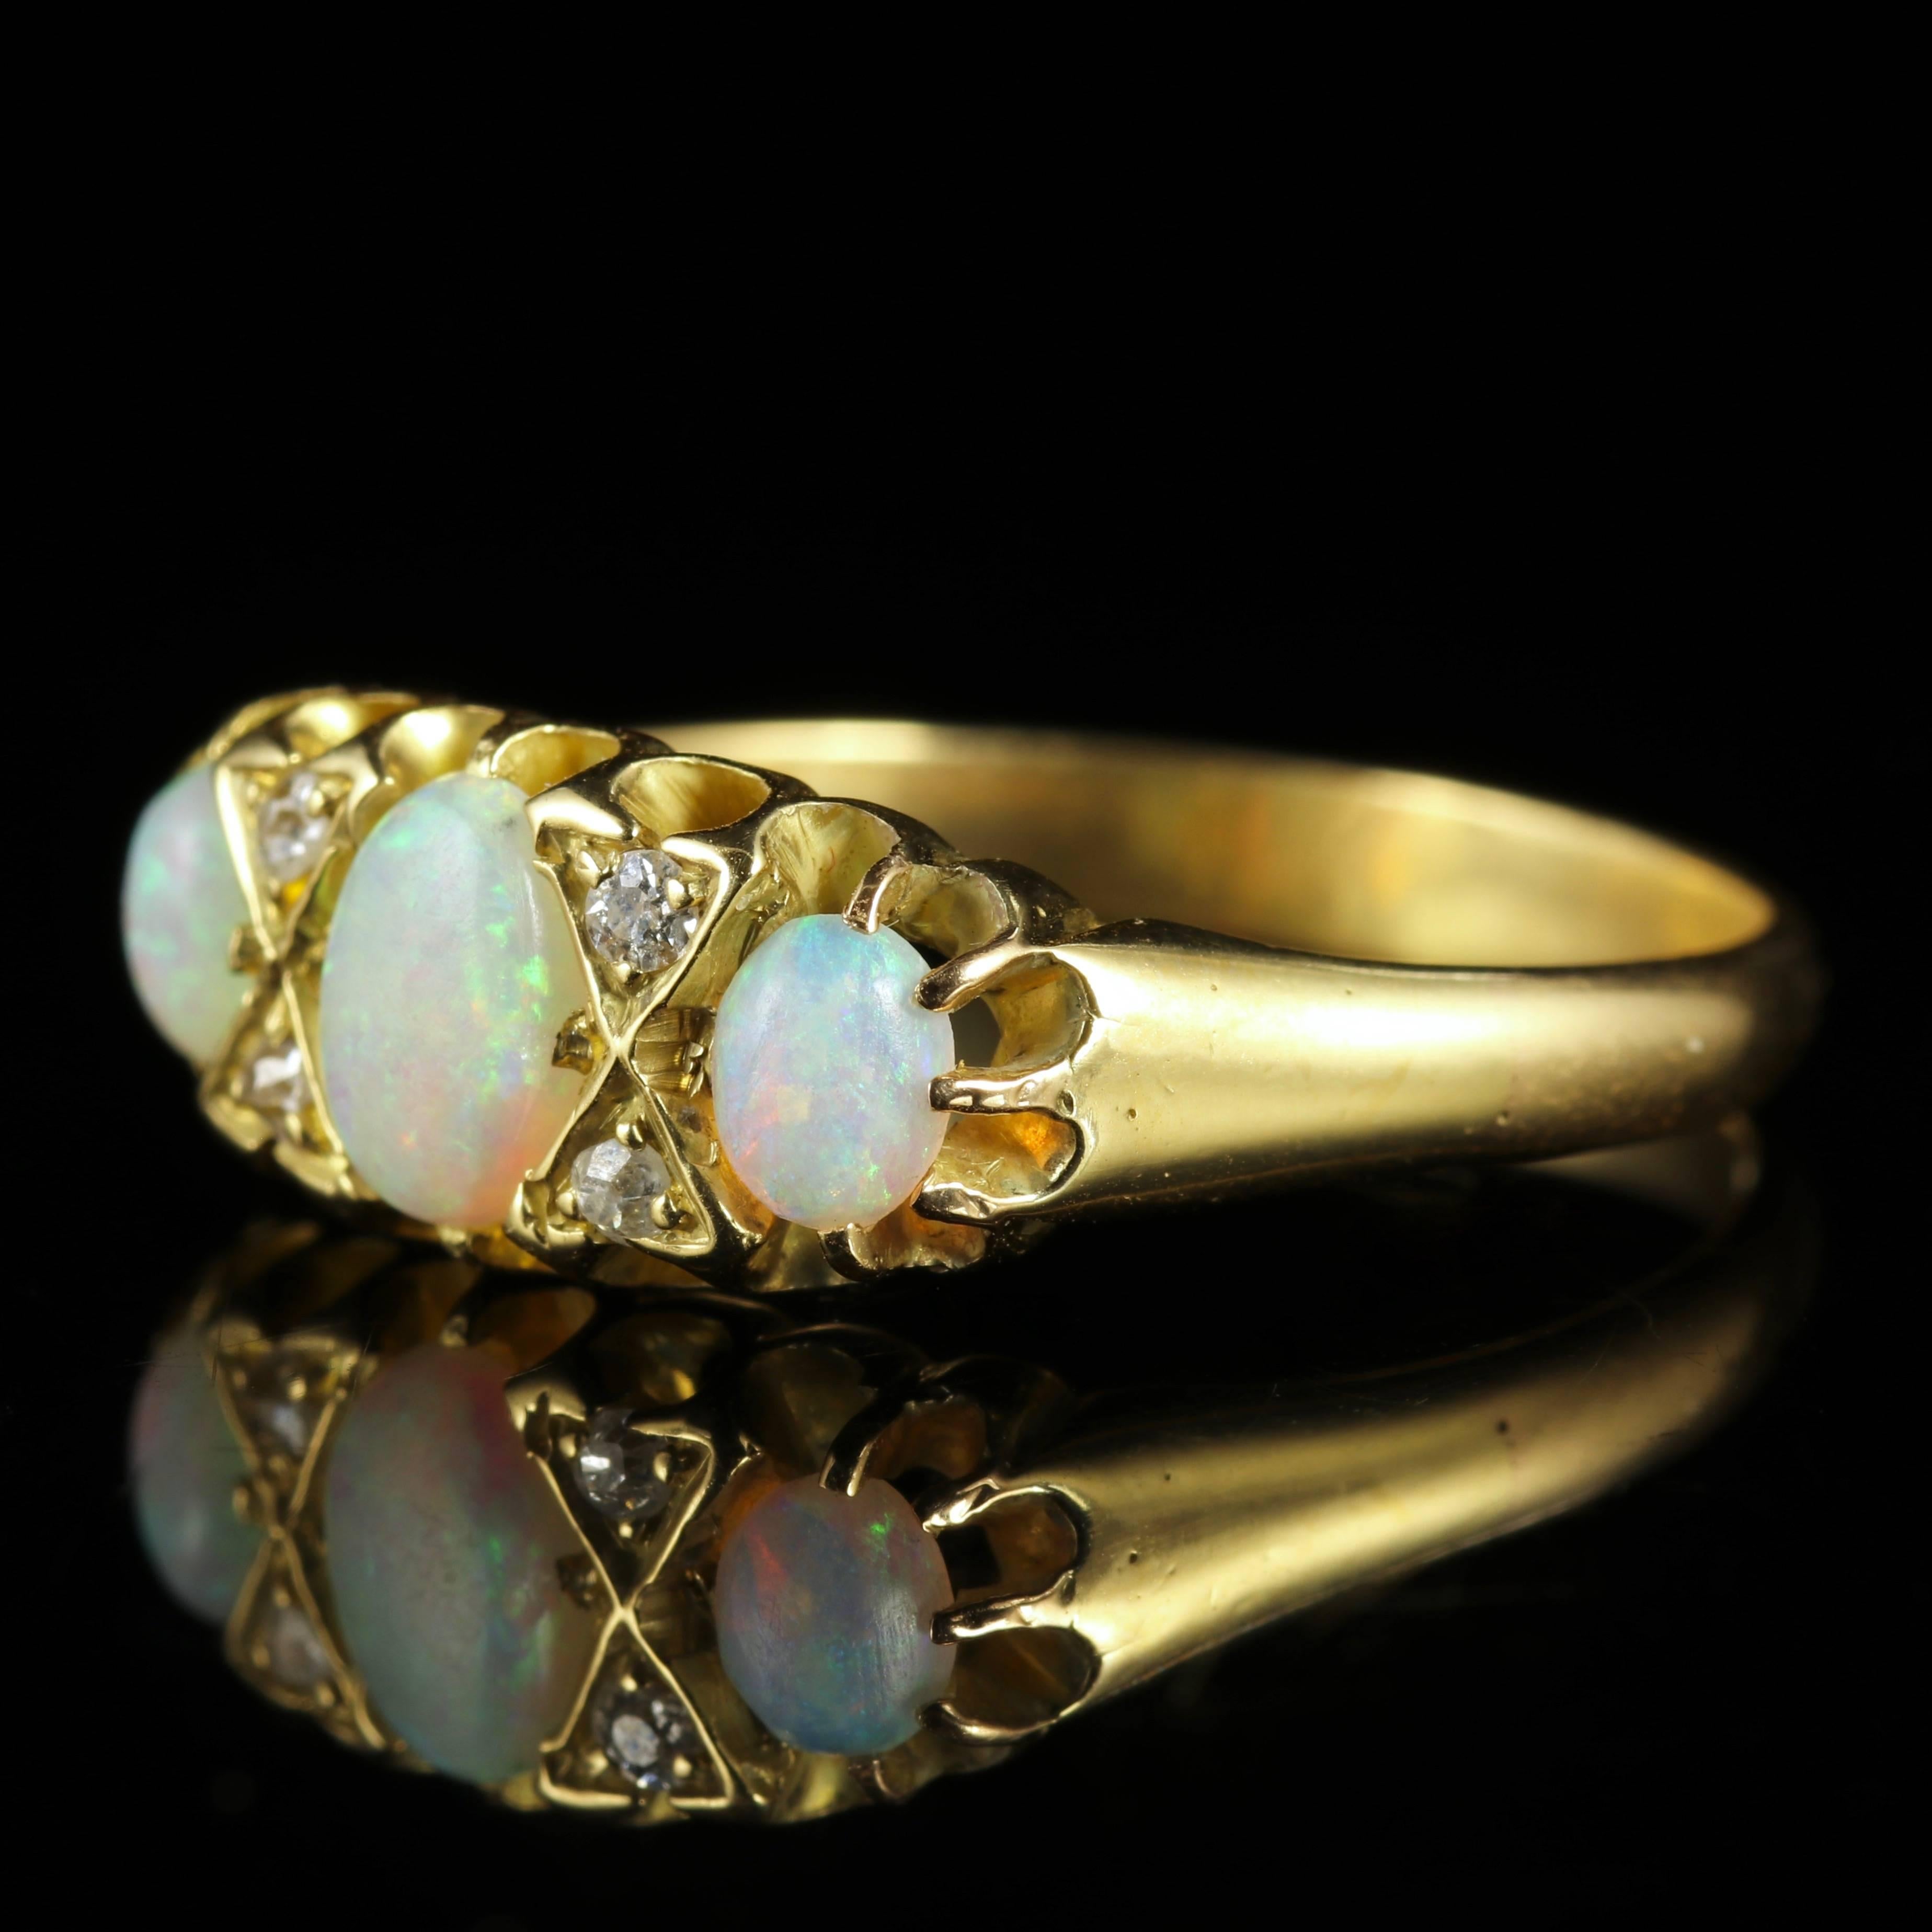 This fabulous Antique 18ct Yellow Gold Victorian natural Opal and Diamond ring is Circa 1900.

A trilogy of natural Opals adorn the ring, with smaller Diamonds set into the gallery.

Trilogy means past, present, future Or those 3 little words -I